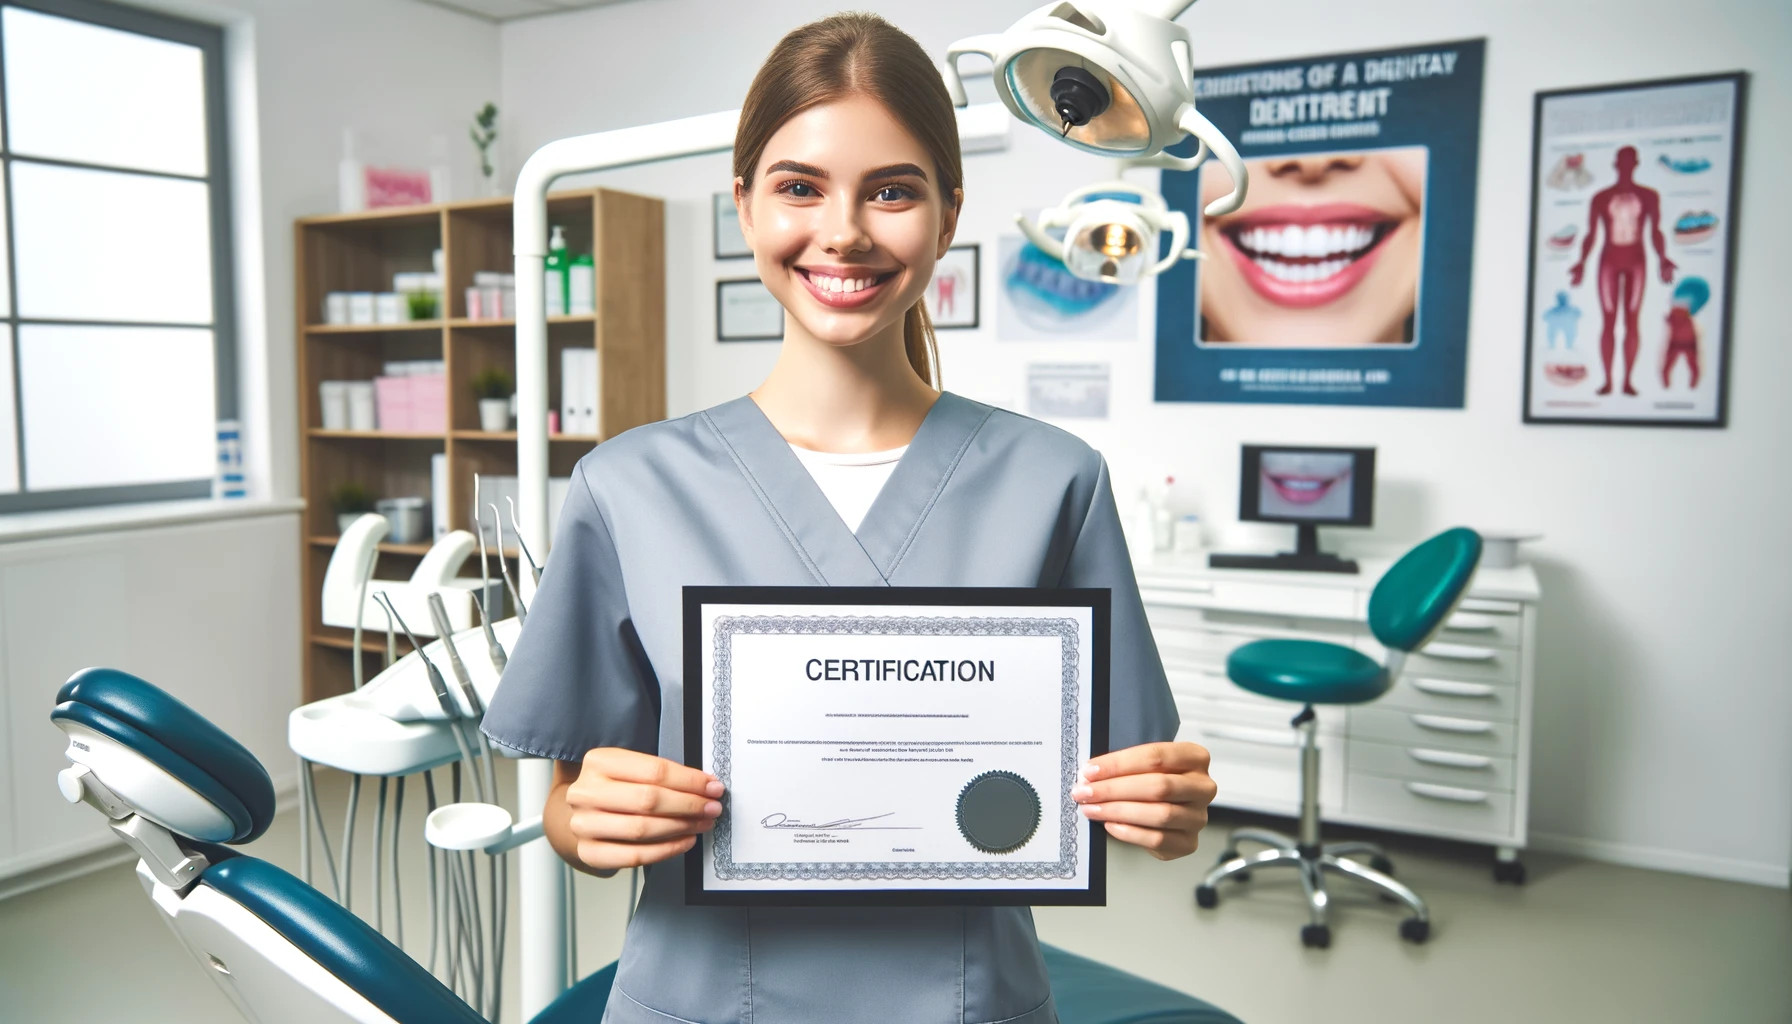 A smiling dental assistant proudly holding up a certification in a modern dental office. The background includes dental equipment and posters.